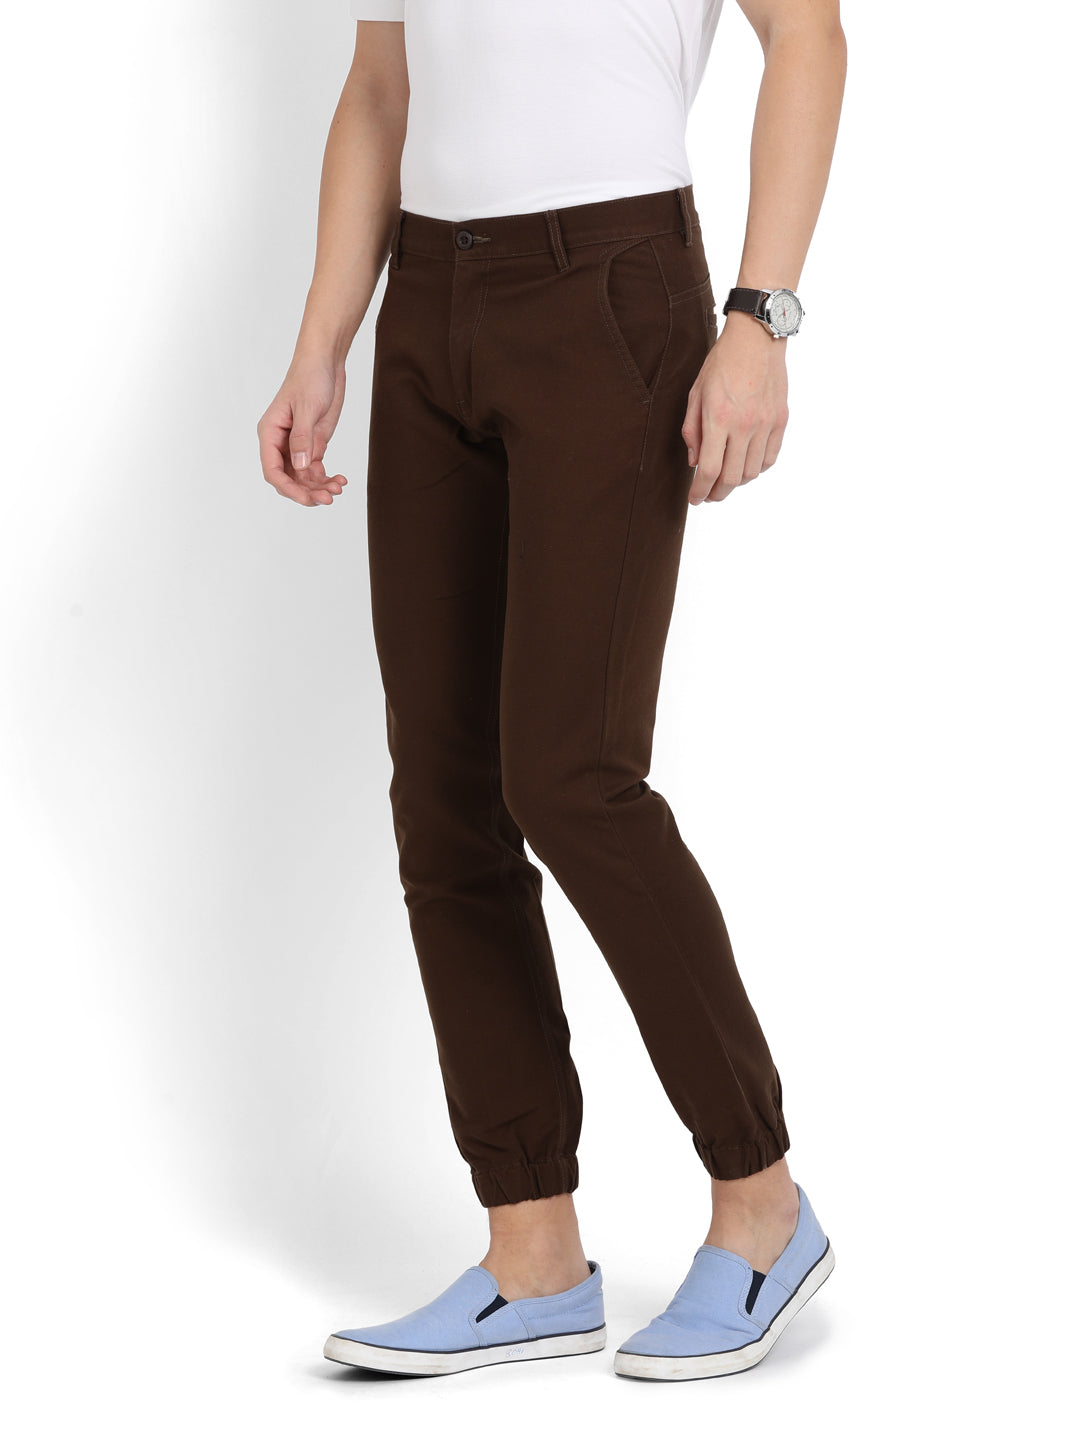 JDC Casual Solid Jogger Trouser  Brown  JDC Store Online Shopping